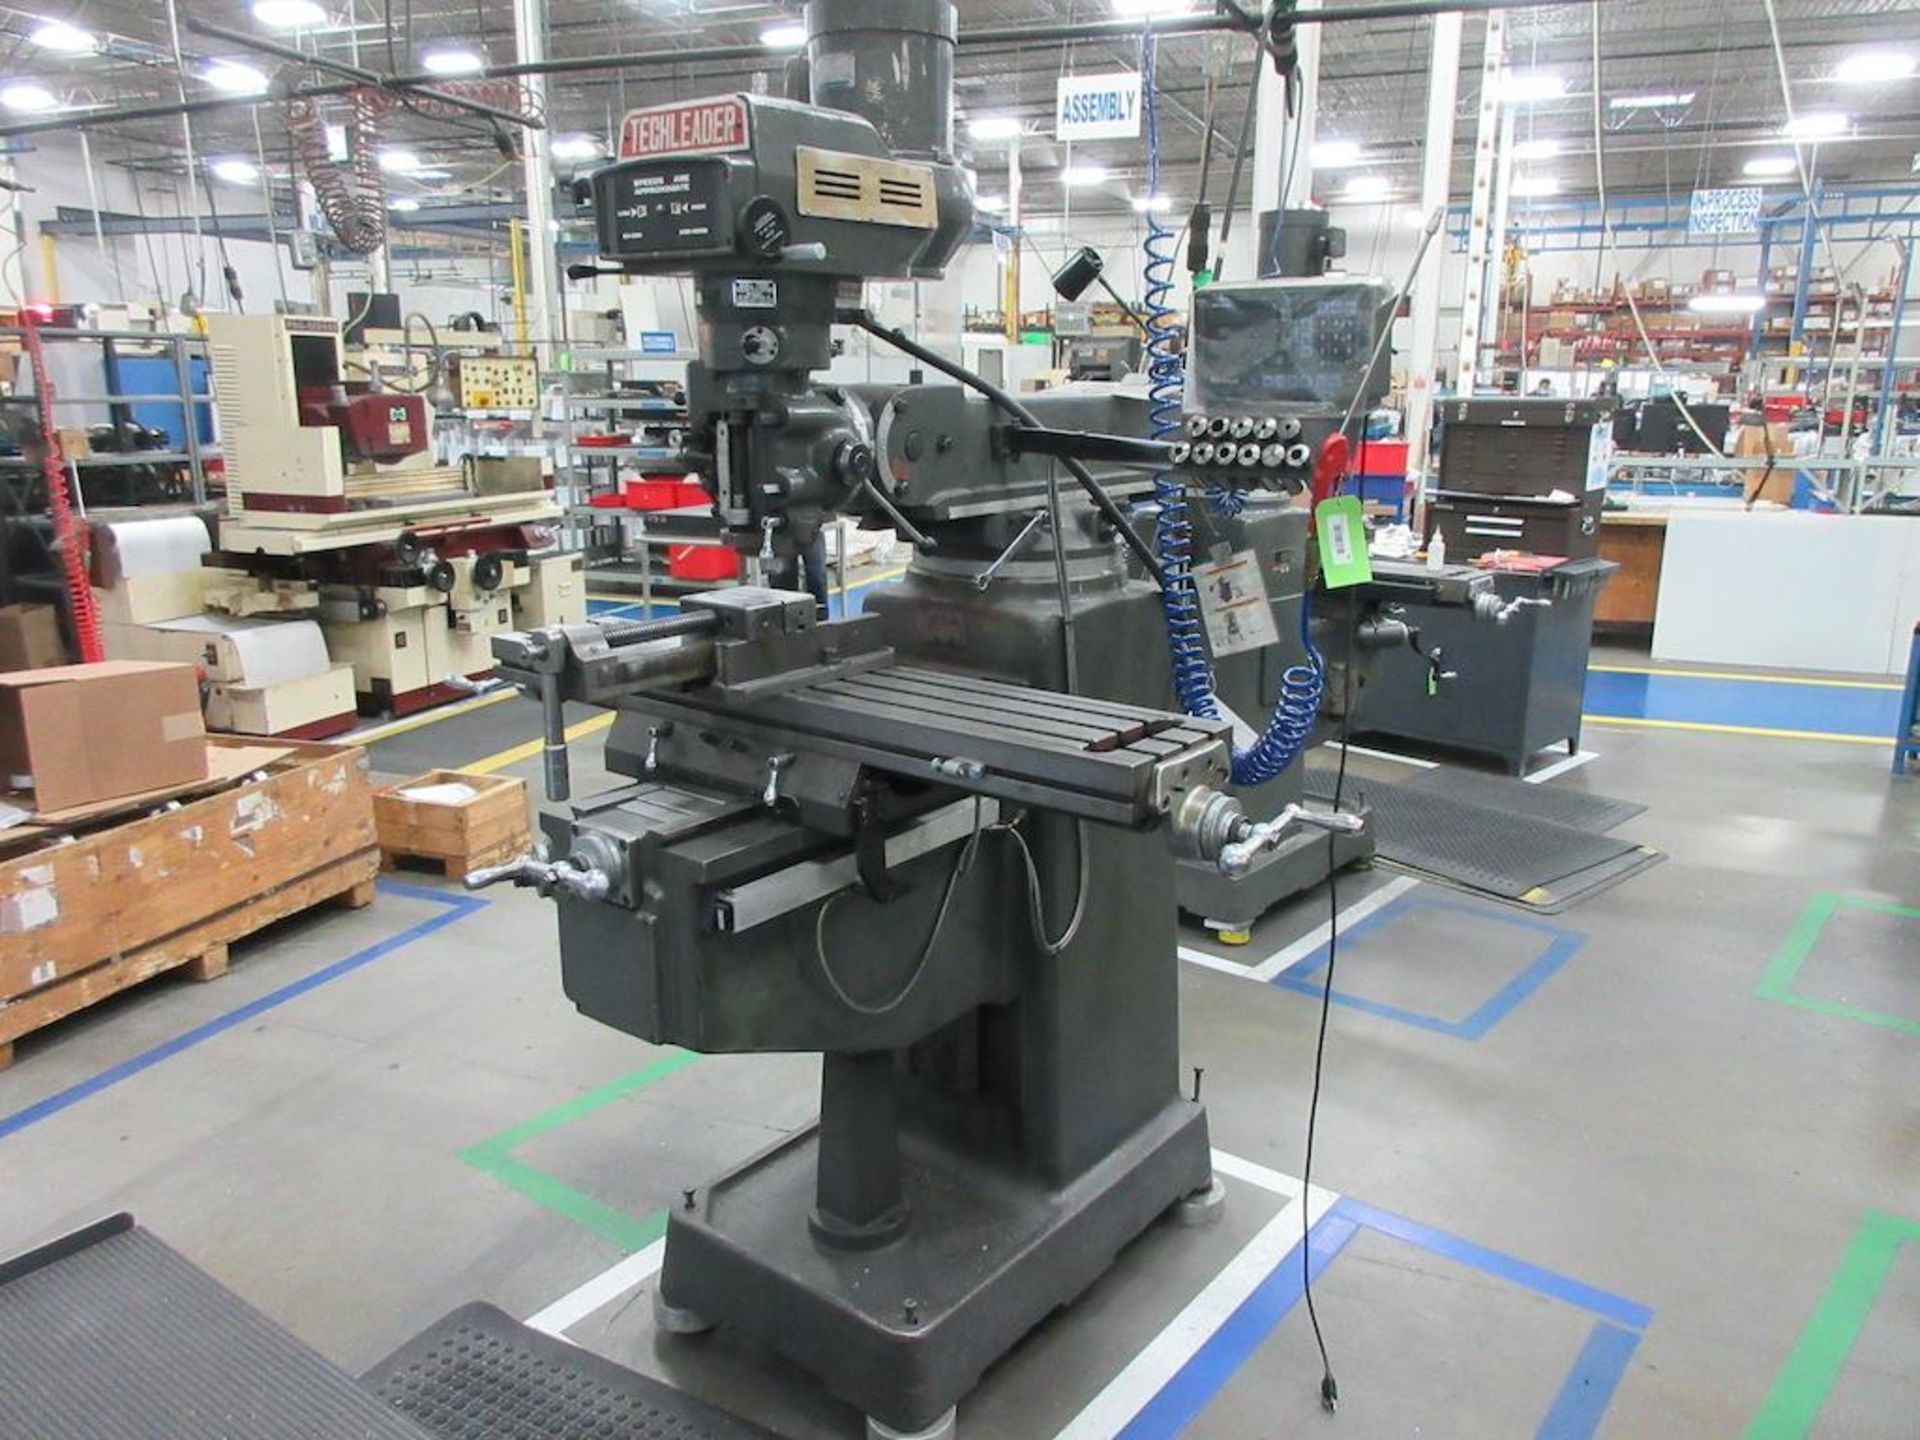 TECHLEADER mill model 3VHR, 60-4200 rpm, 10" x 50" table, Mitutoyo 2 axis DRO, 1996, sn 8771 [M0154]